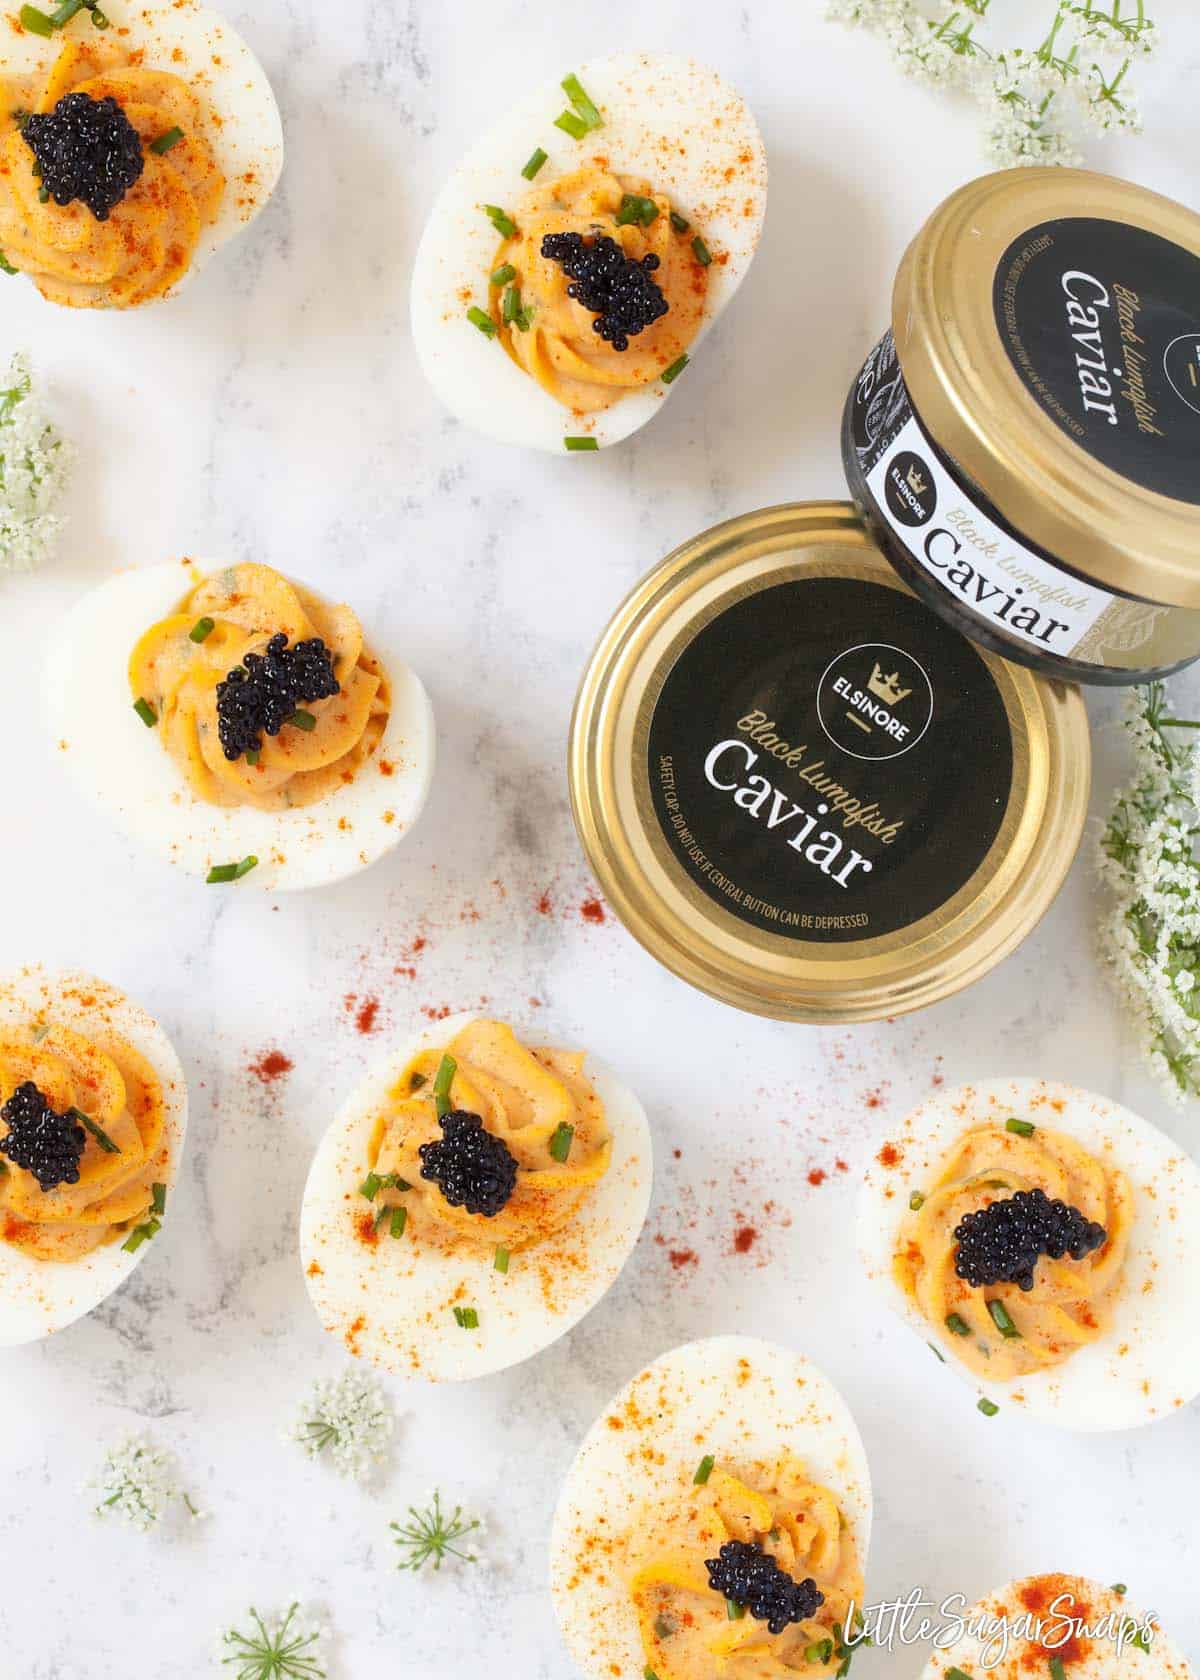 Devilled eggs with caviar on a worktop with unopened jars caviar alongside